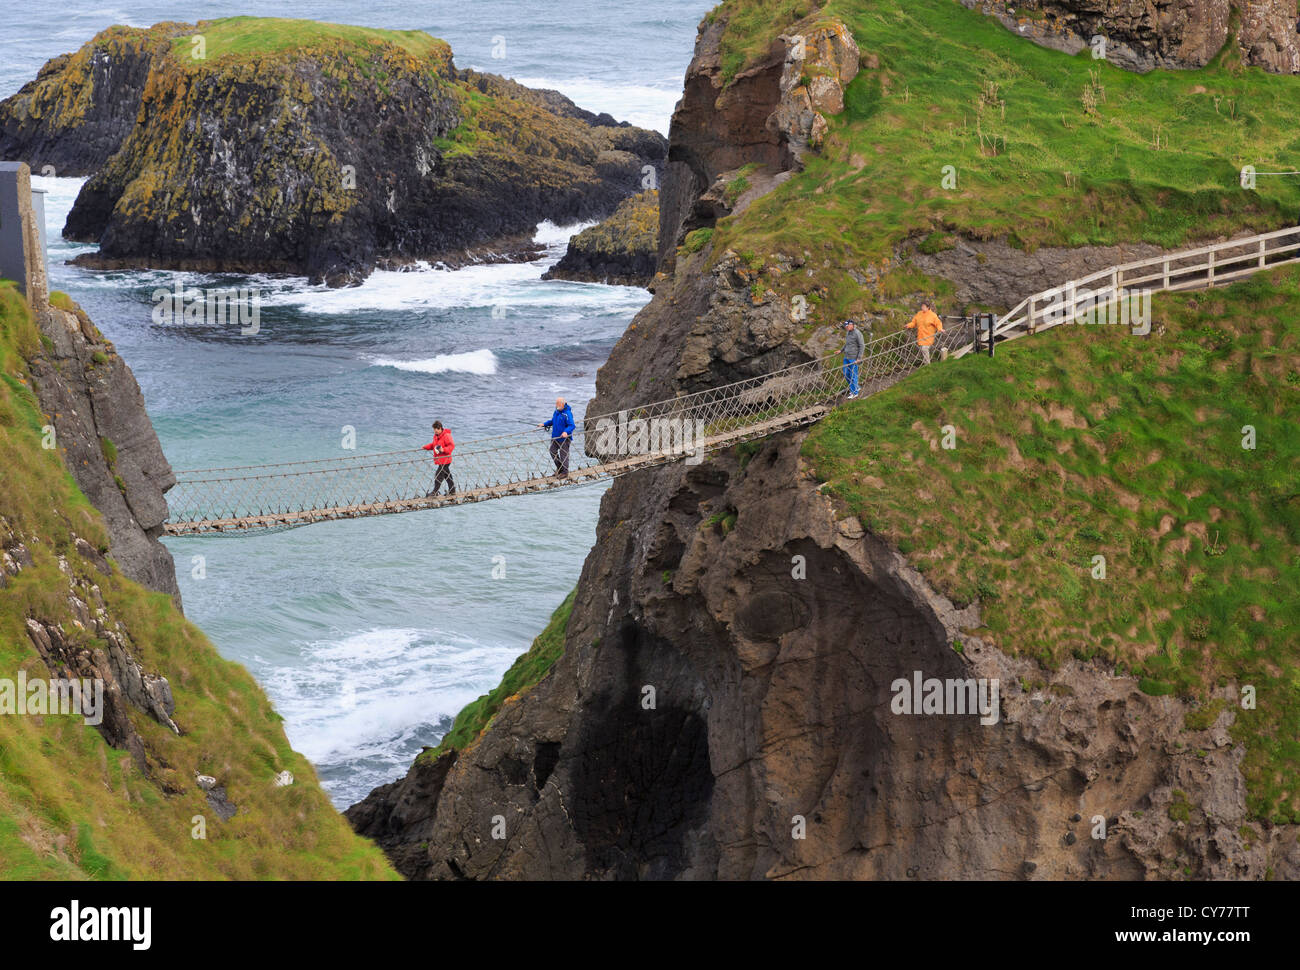 People walking on Carrick-a-Rede Rope Bridge from Carrick Island